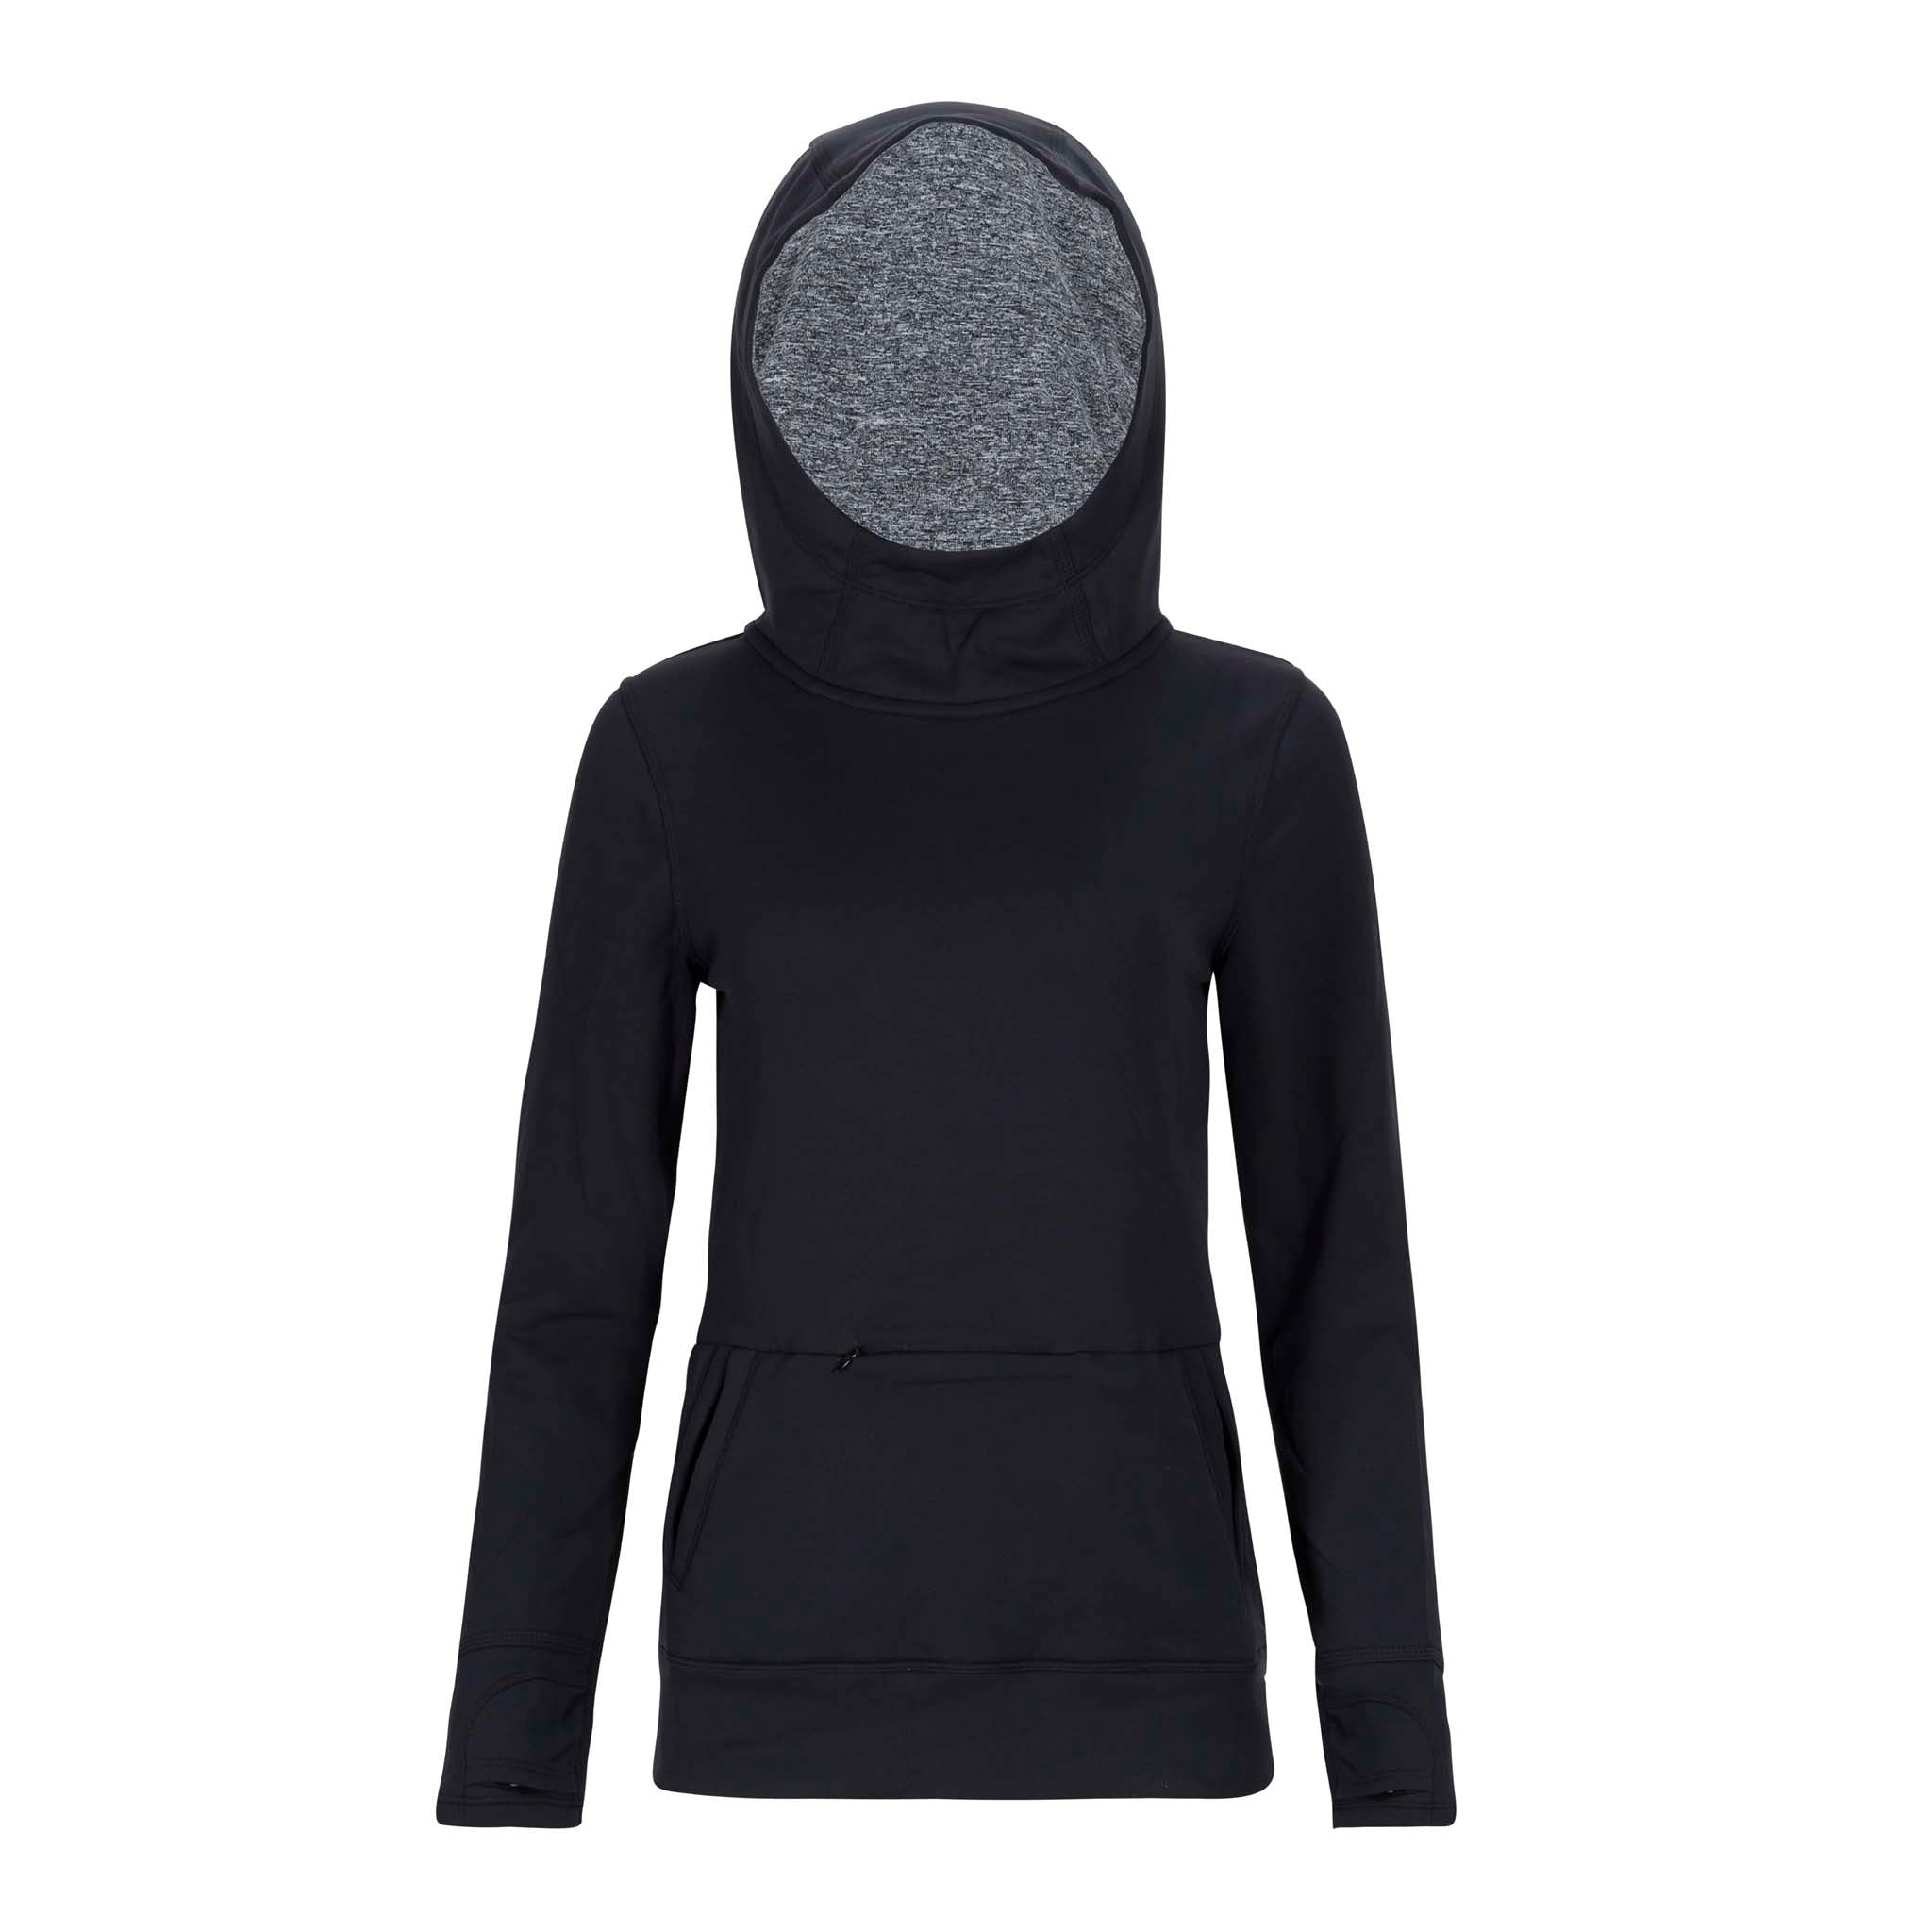 sync-performance-women's-benchmark-hoodie-1.0-black-front